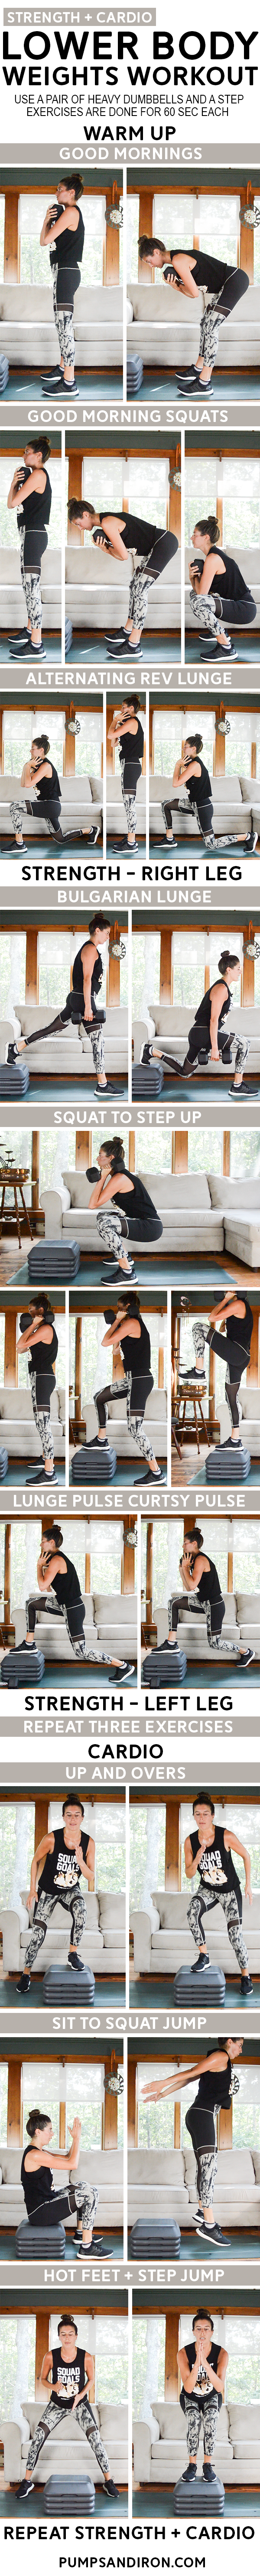 Strength + Cardio Heavy Lower Body Workout - You'll need a set of heavy dumbbells and a stepper for this lower body workout. Video included! #workout #fitness #athomeworkout https://pumpsandiron.com